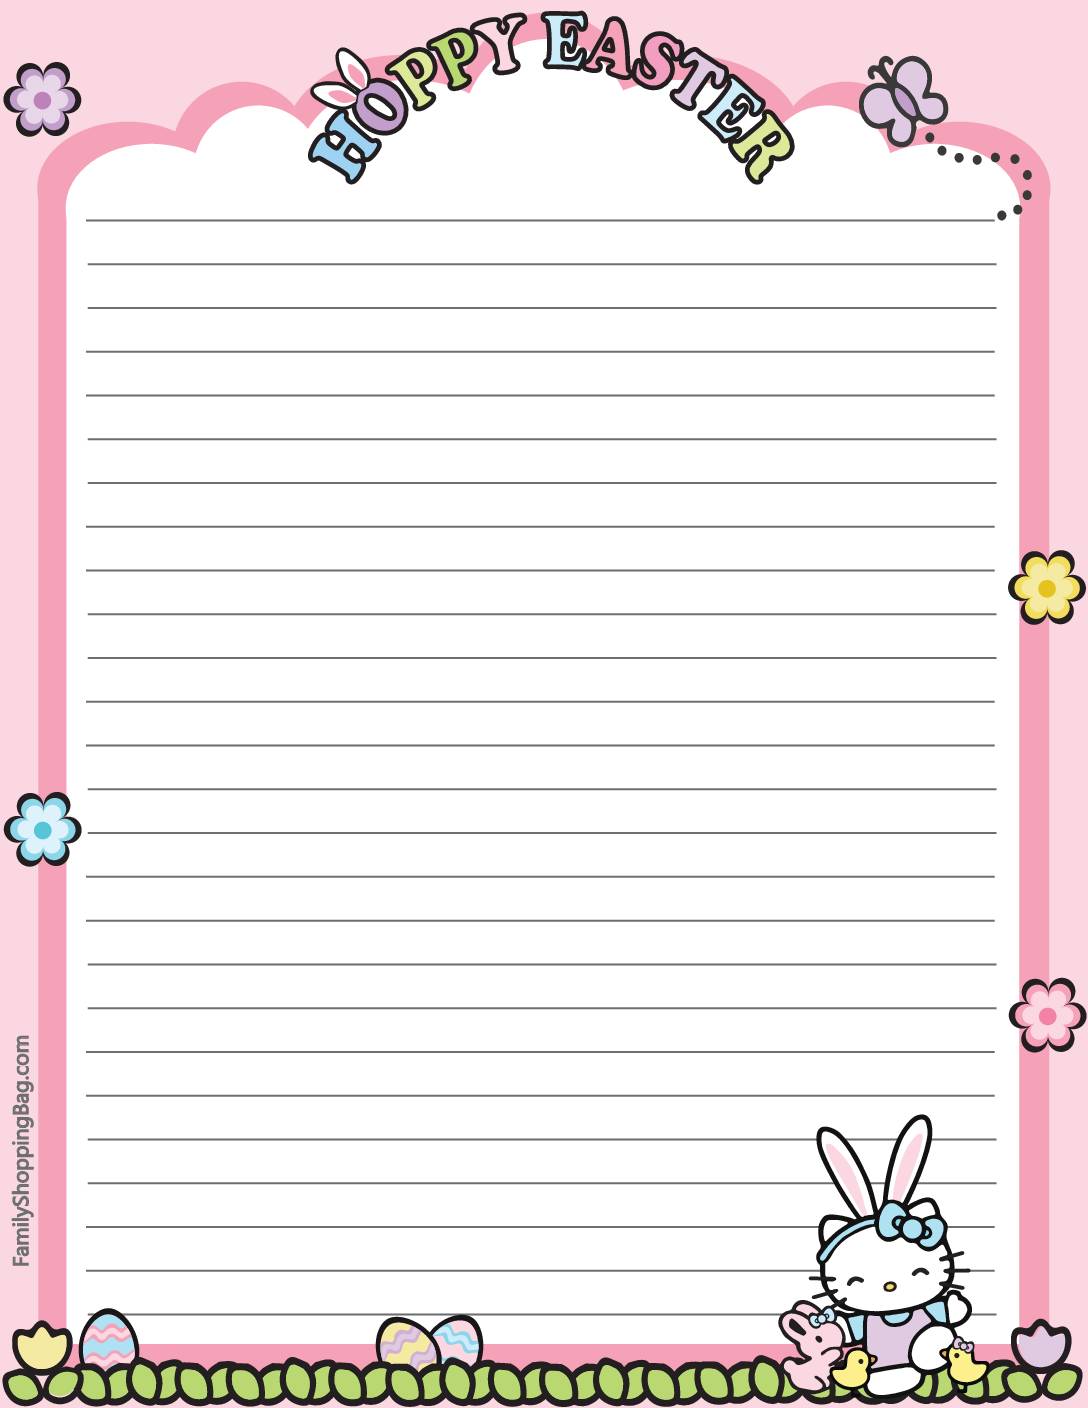 Stationery 2 Easter